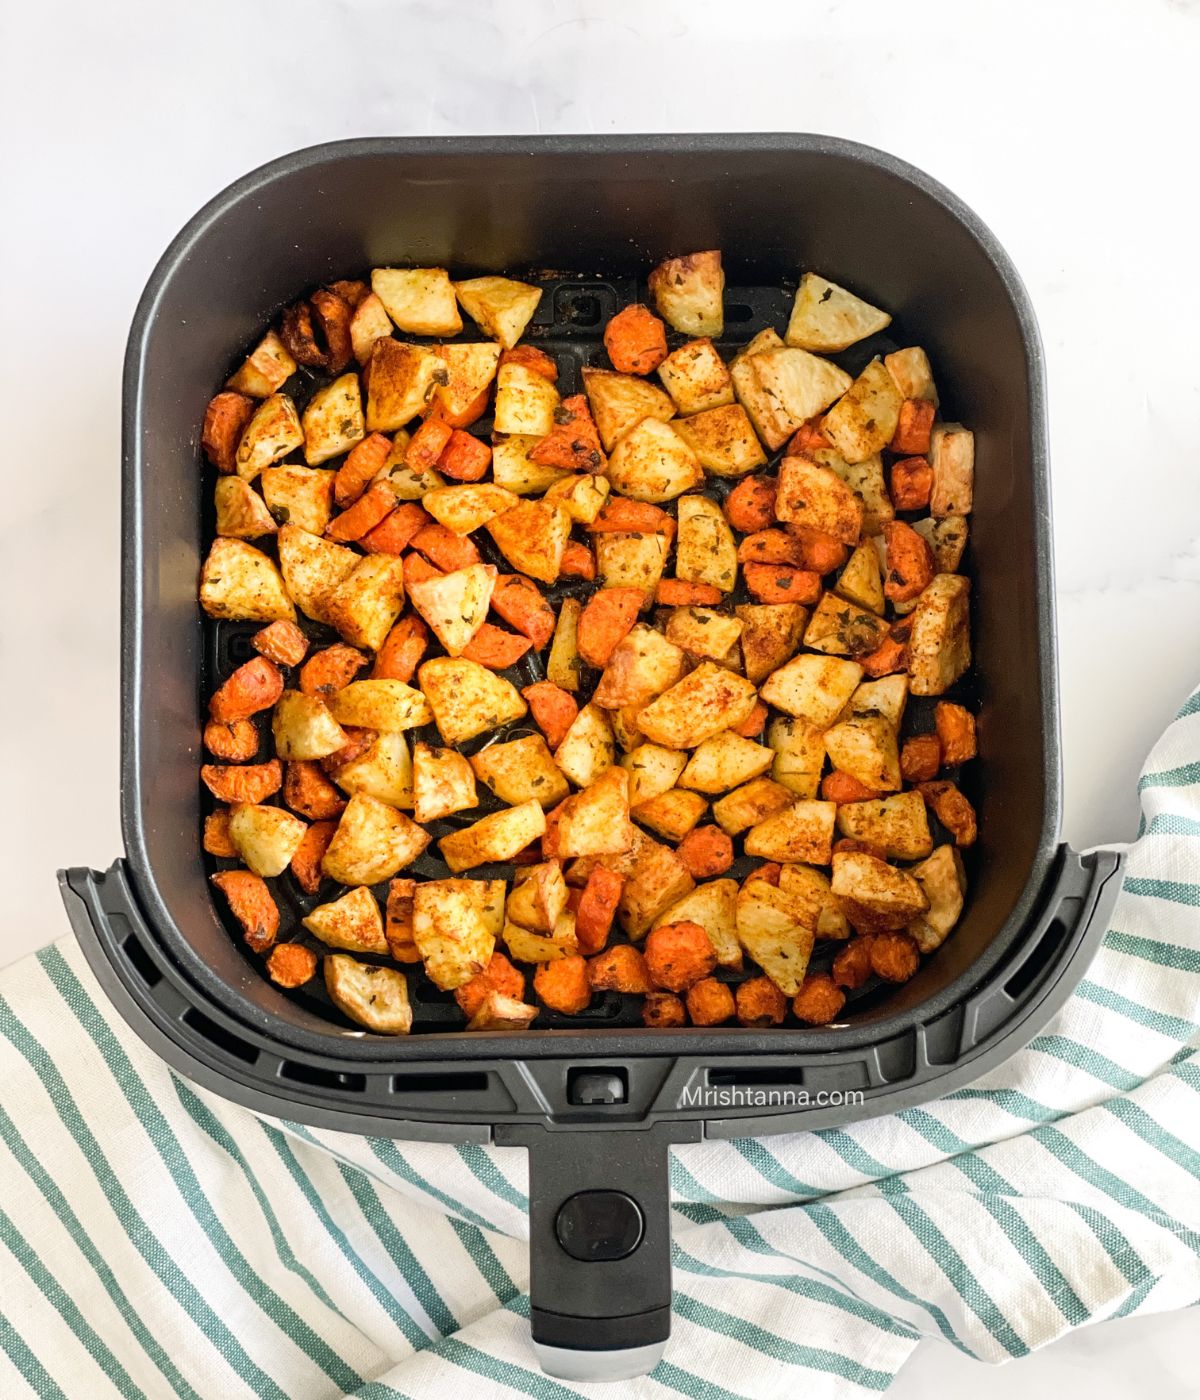 The air fryer basket is with roasted carrots and potatoes over the napkin.